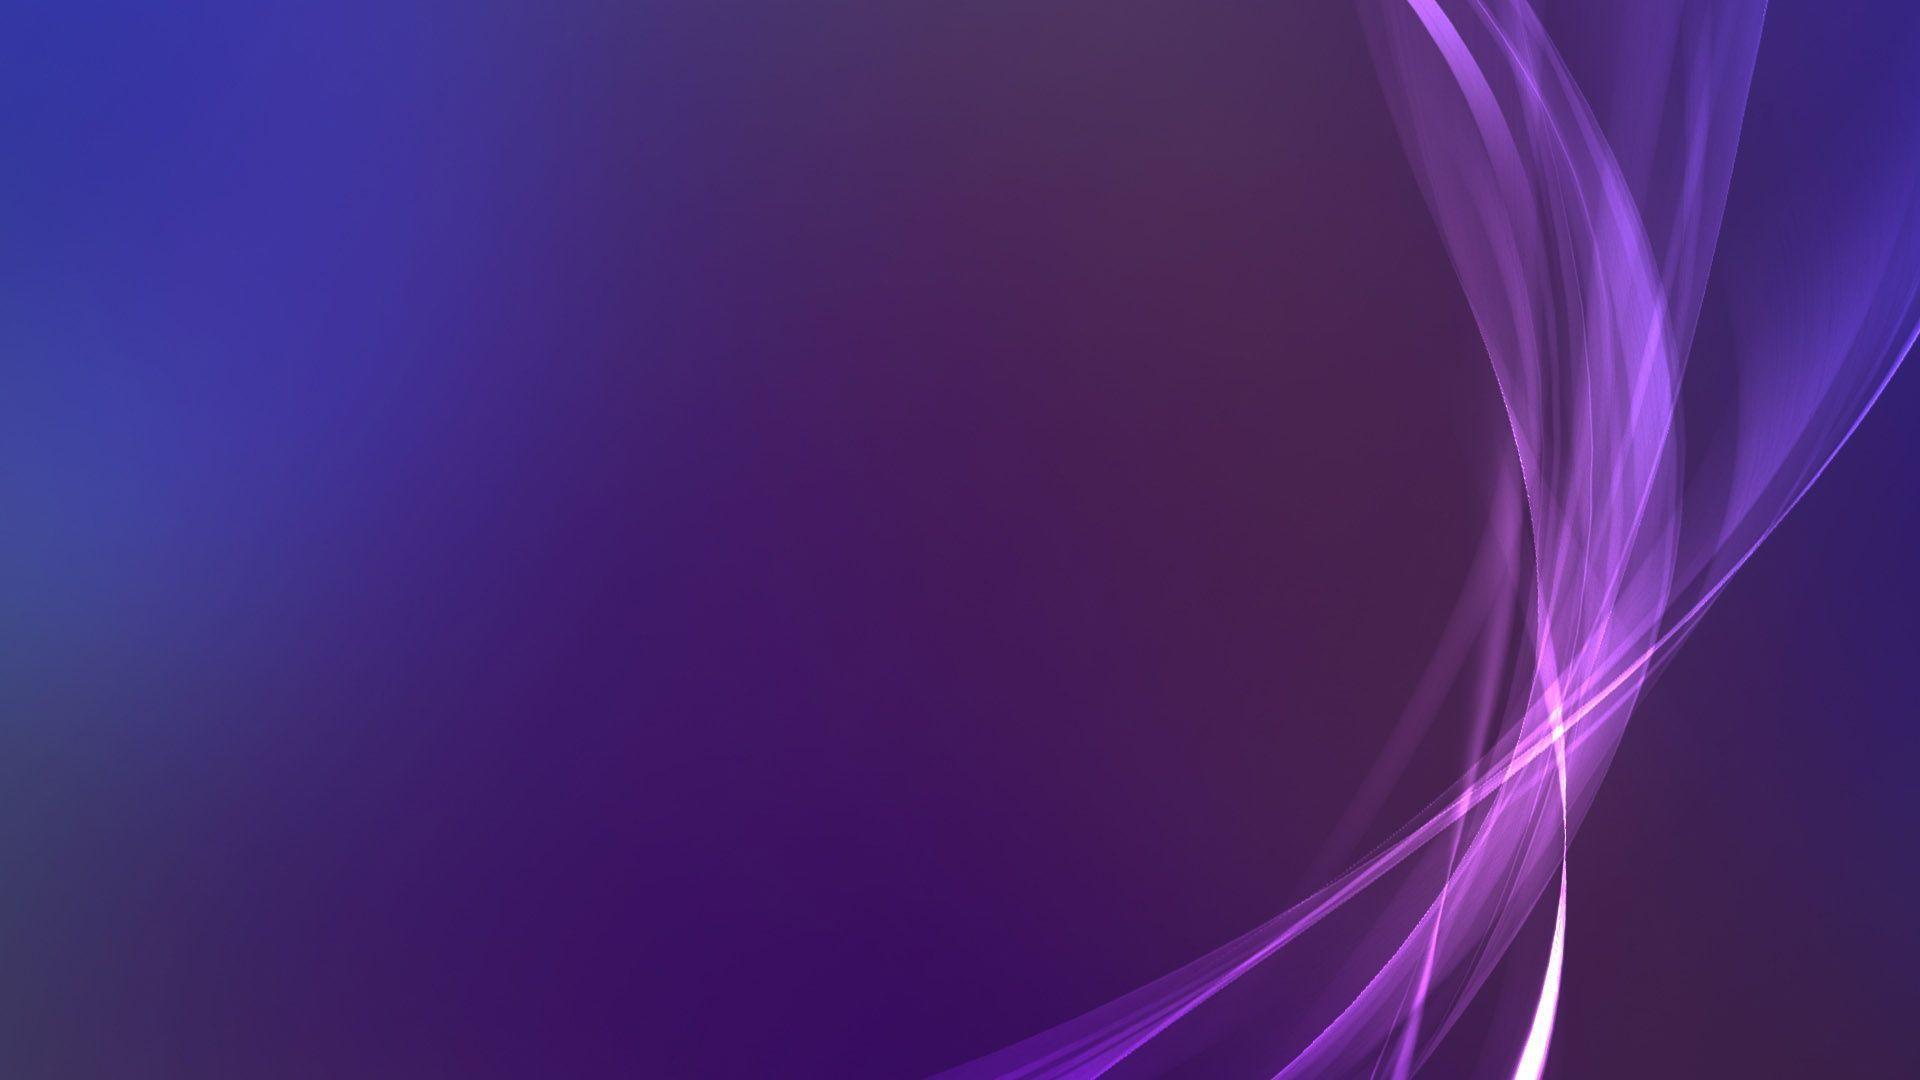 Download Purple Android Backround Fullhd Free Wallpaper 1920x1080